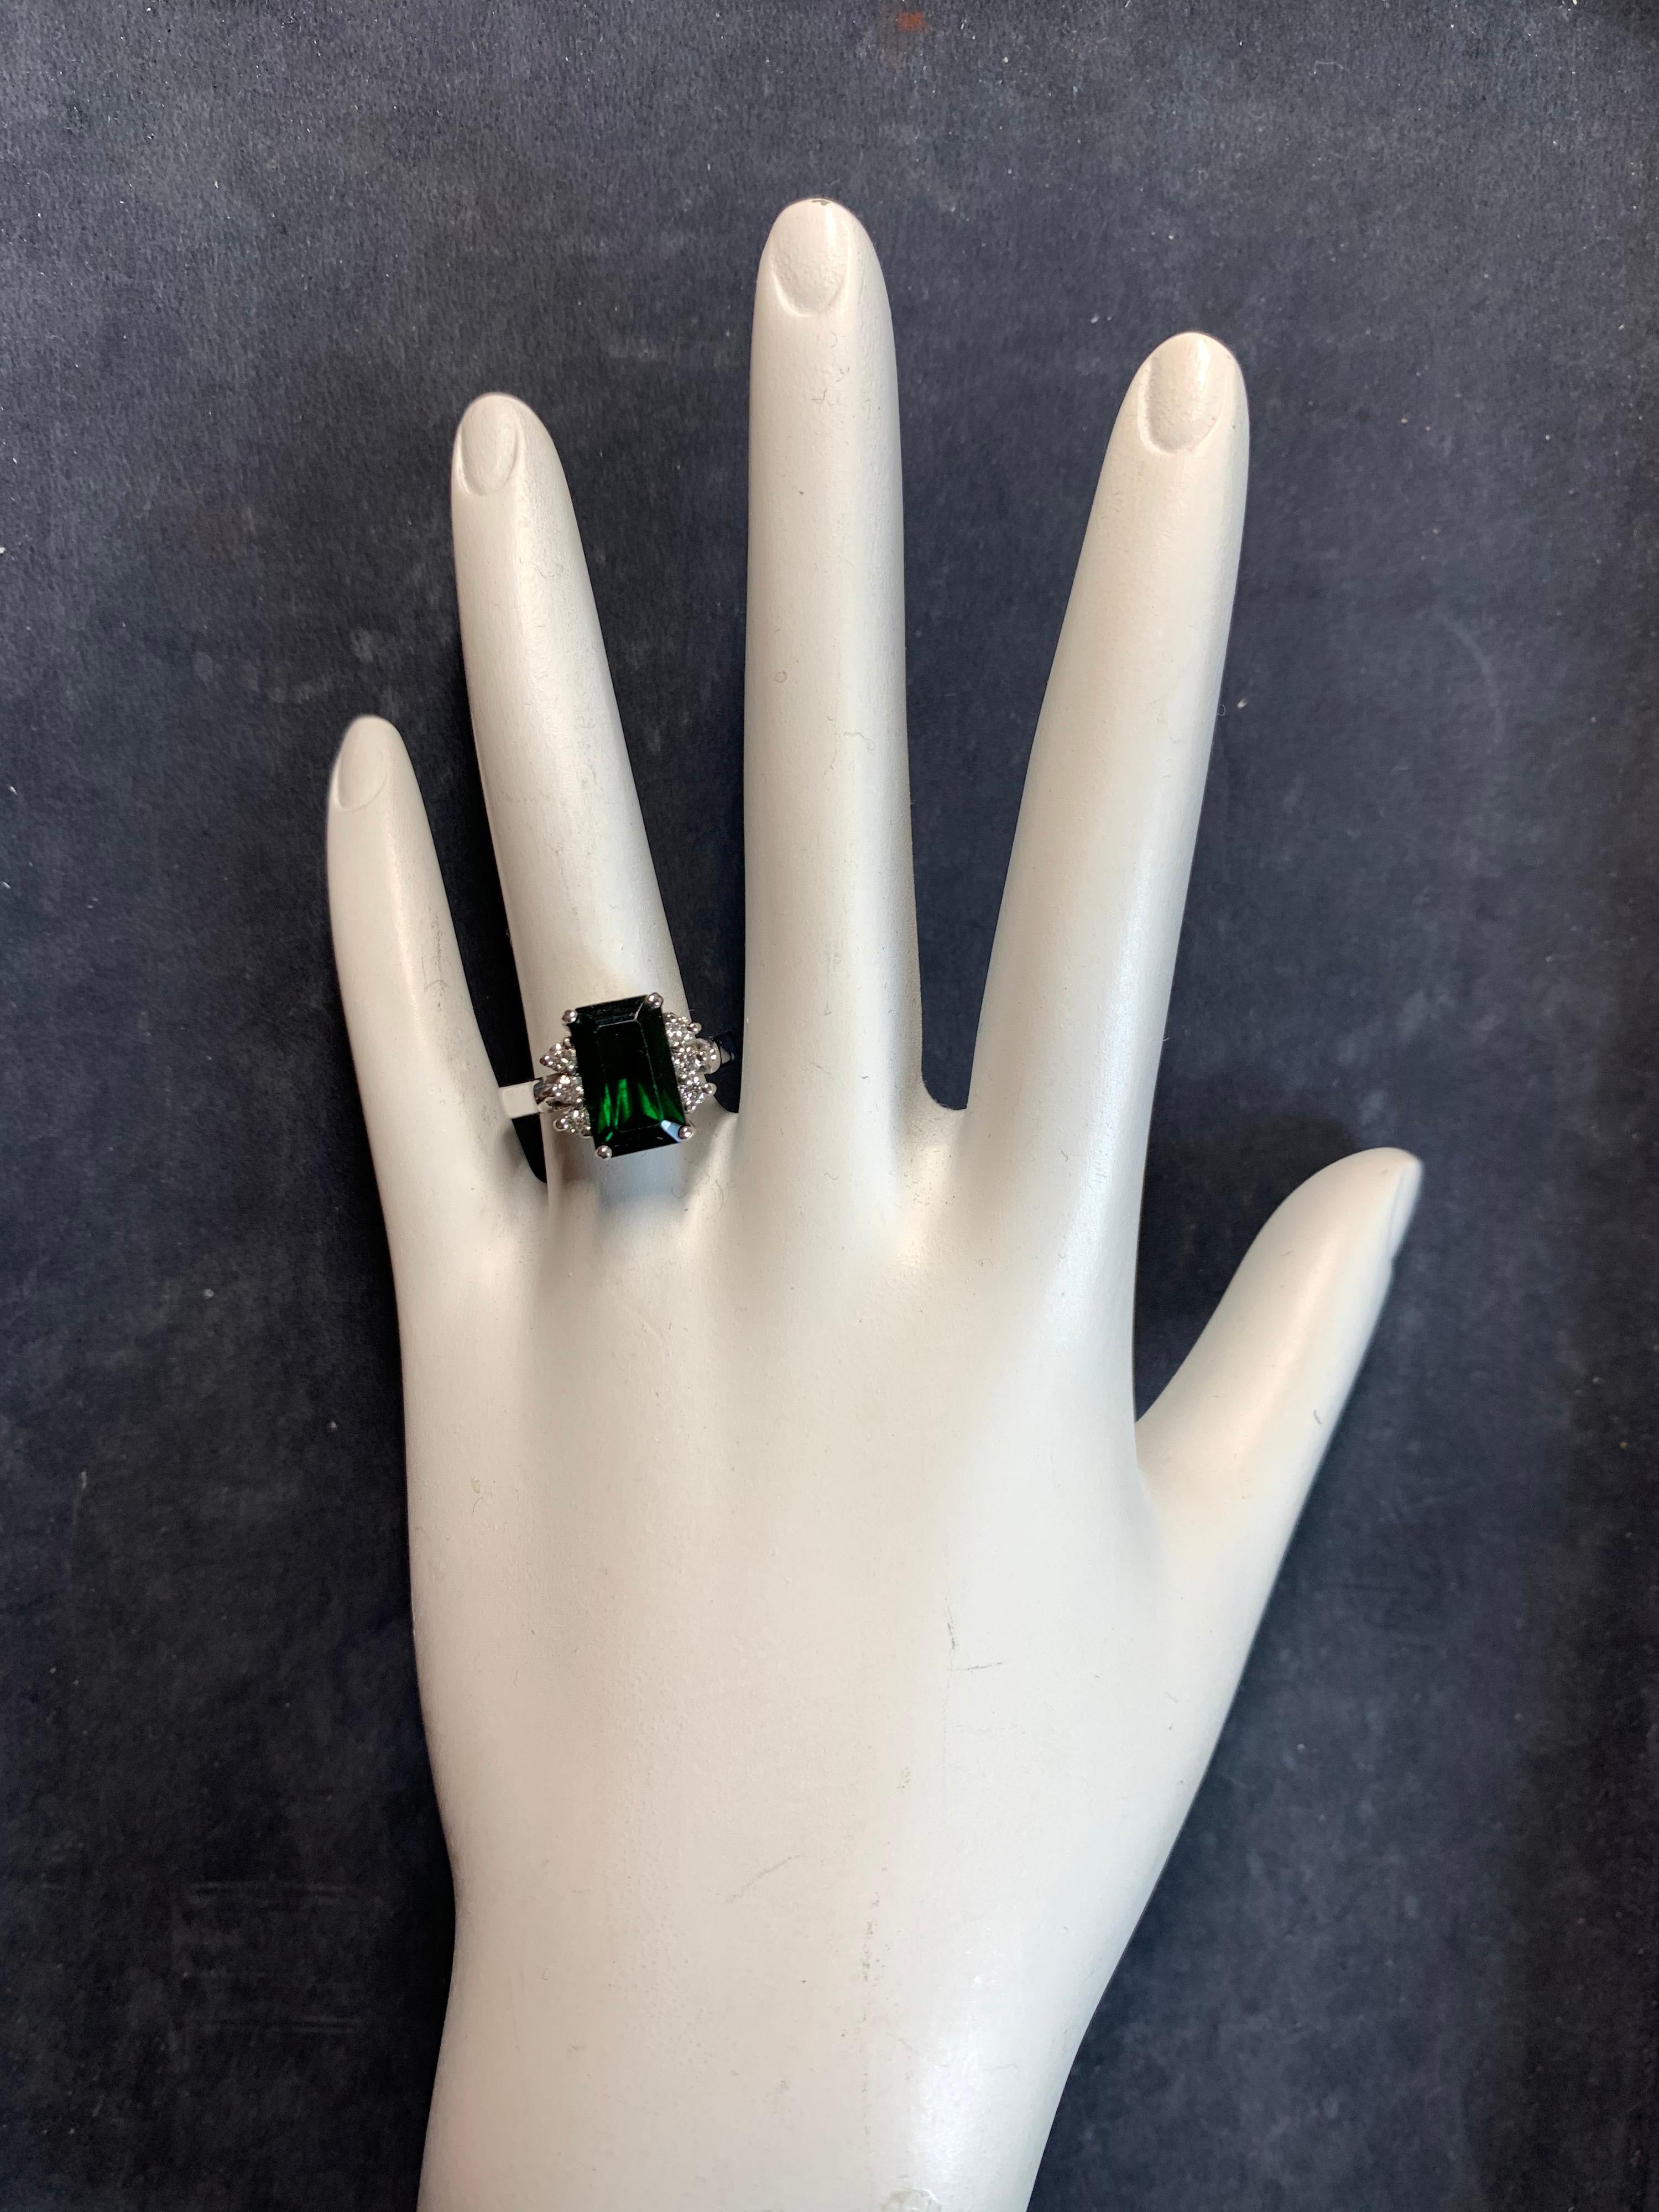 Modern Estate 14k White Gold 4 Carat Natural Green Tourmaline Gemstone & Diamond Cocktail Ring. 

The Deep Green centerstone measures 11.3x6.9x5.7mm and weighs approximately 3.75 Carats. 

It is flanked by six natural colorless 2mm round brilliant